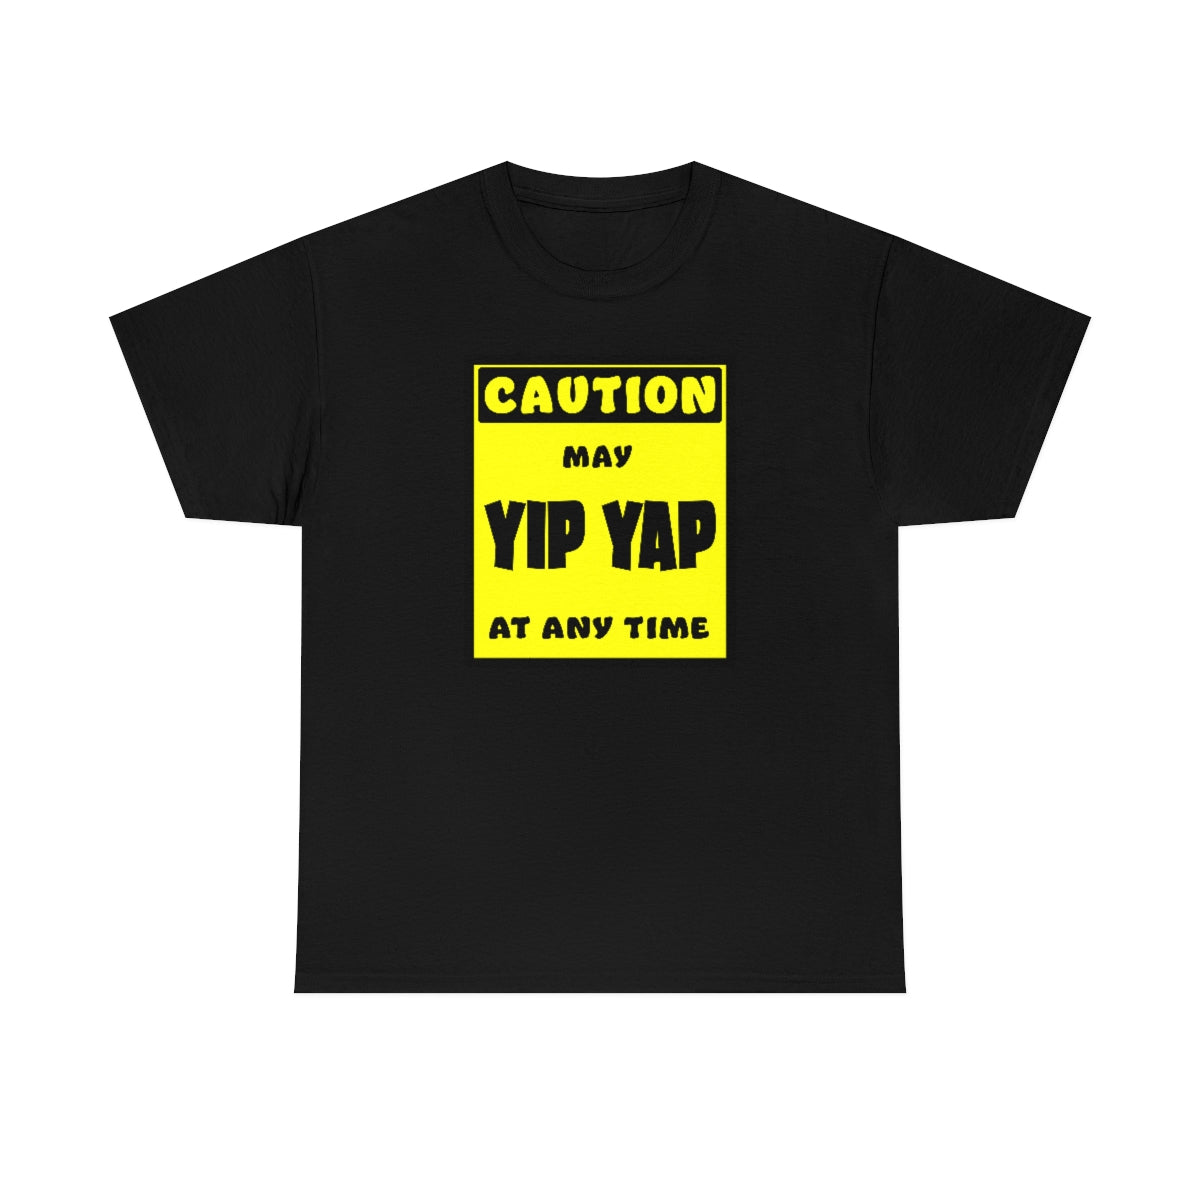 CAUTION! May Yip Yap at any time! - T-Shirt T-Shirt AFLT-Whootorca Black S 